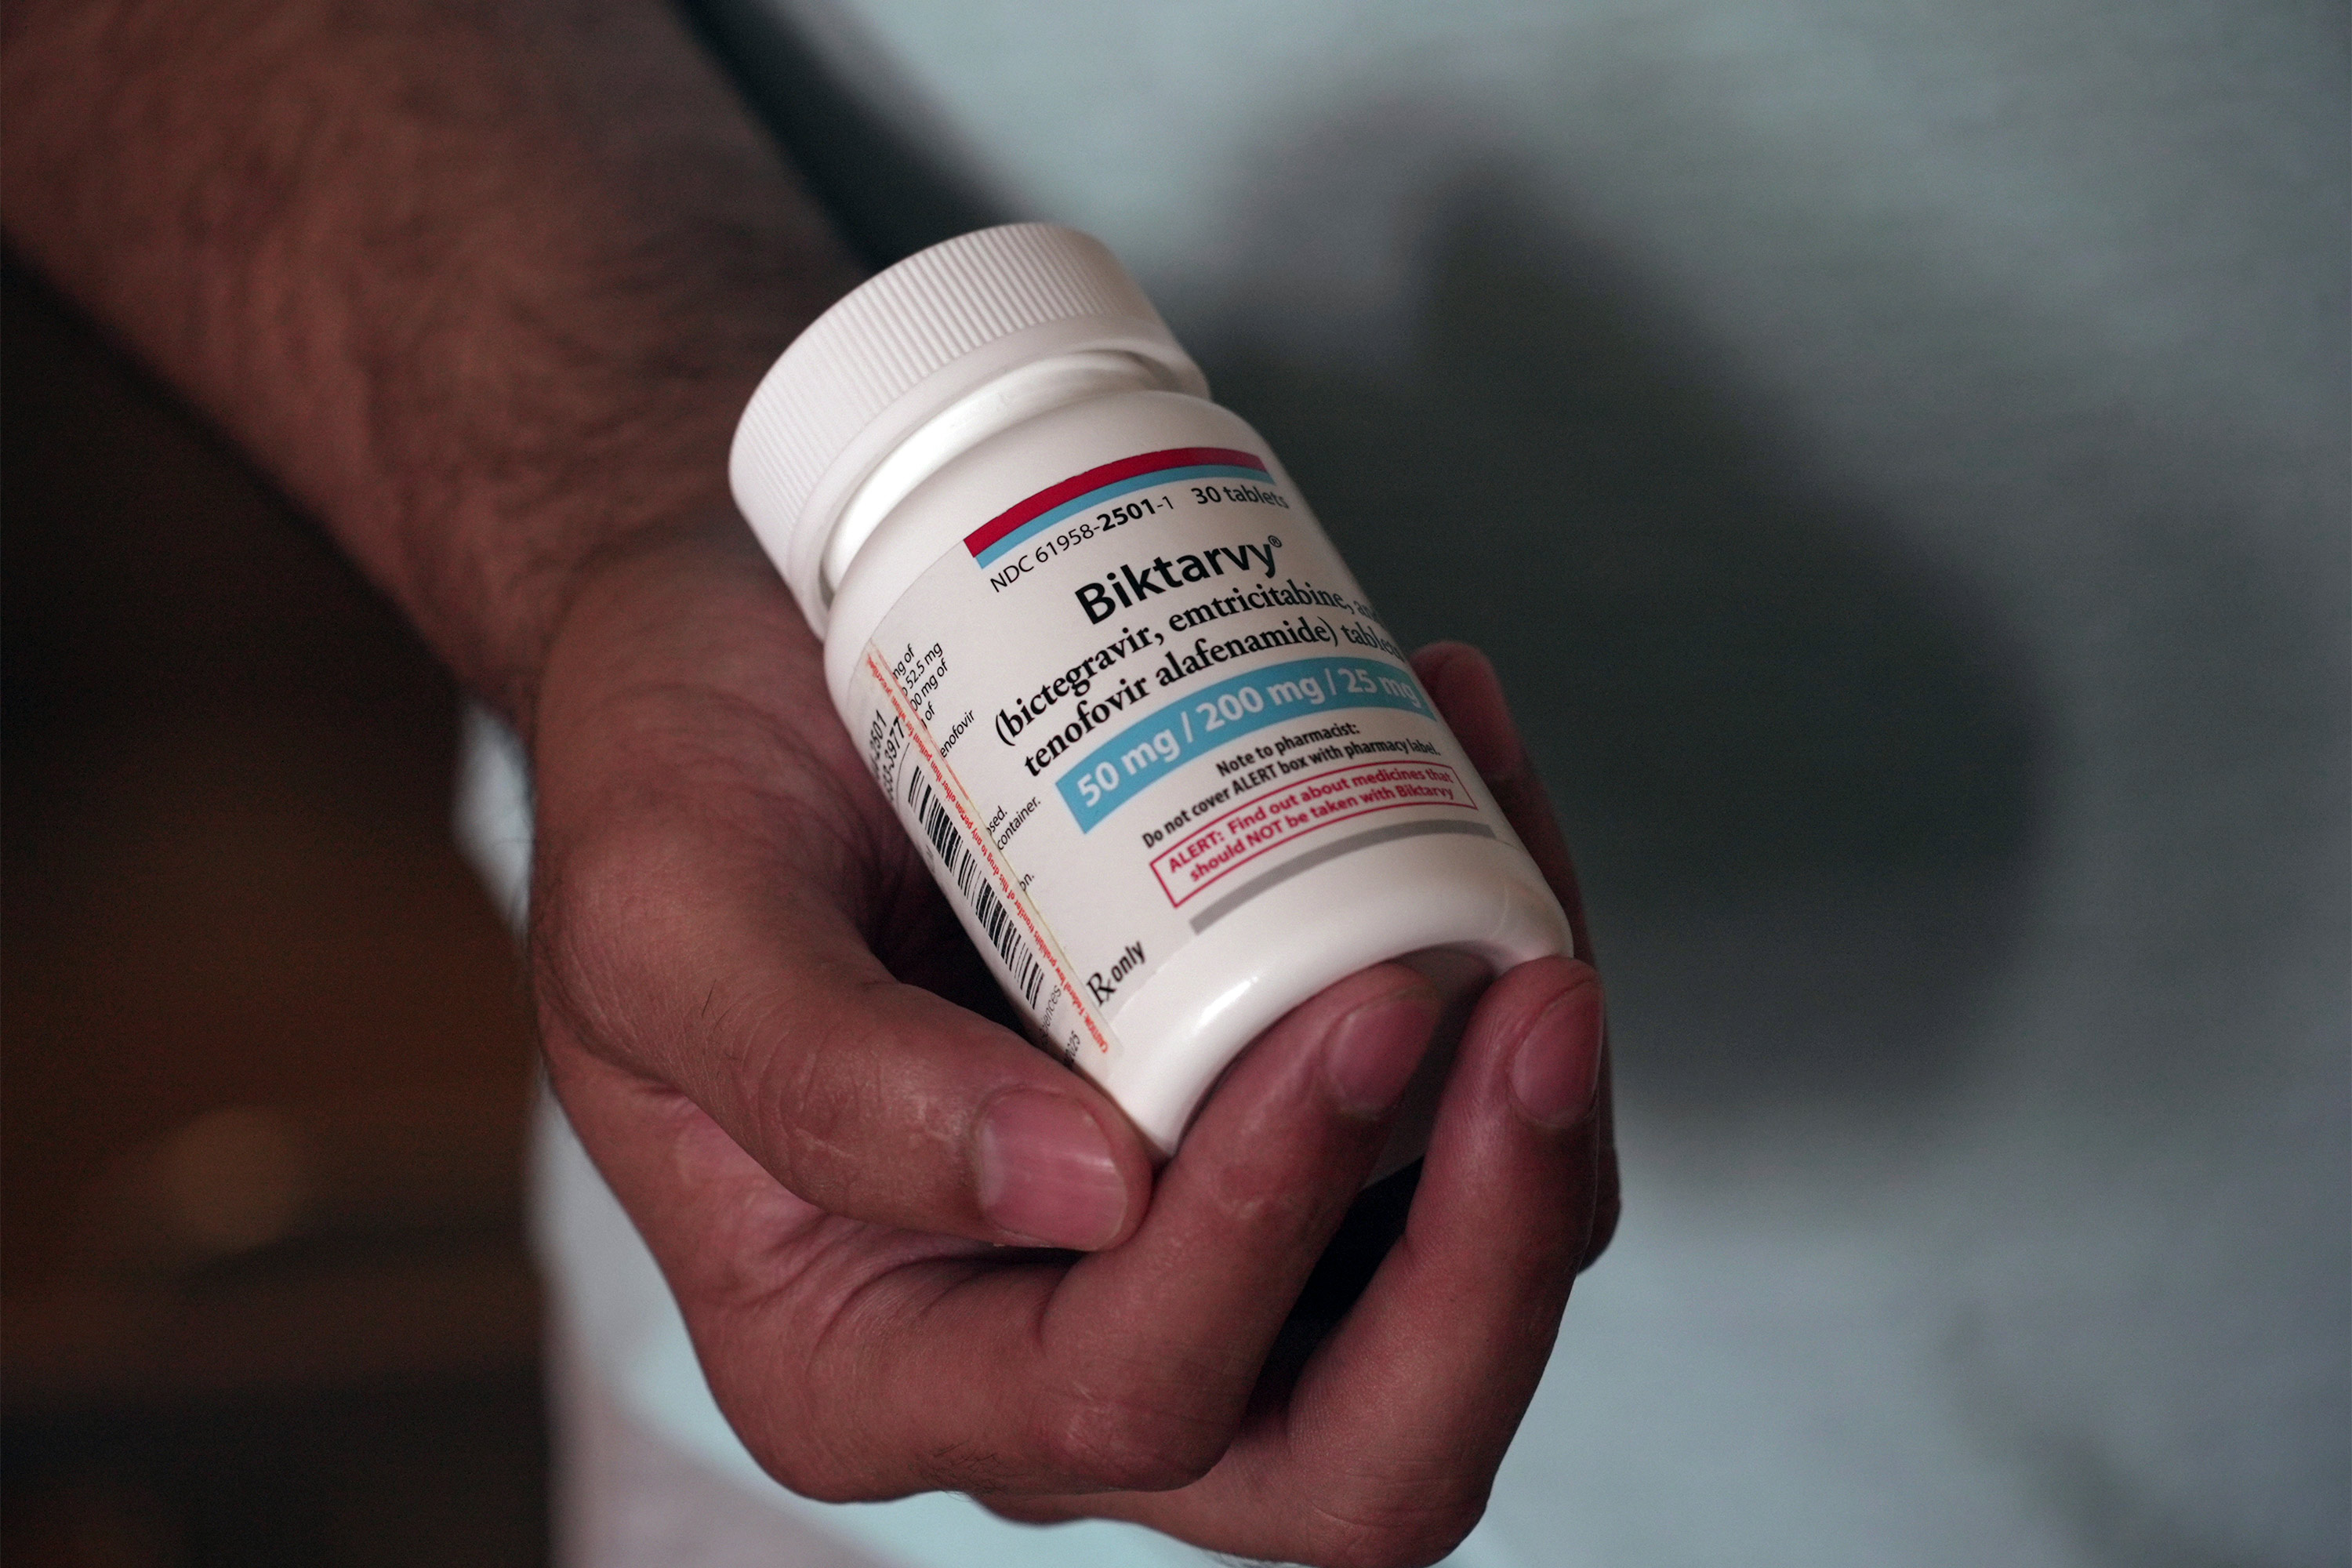 A photo of a hand holding a pill bottle.